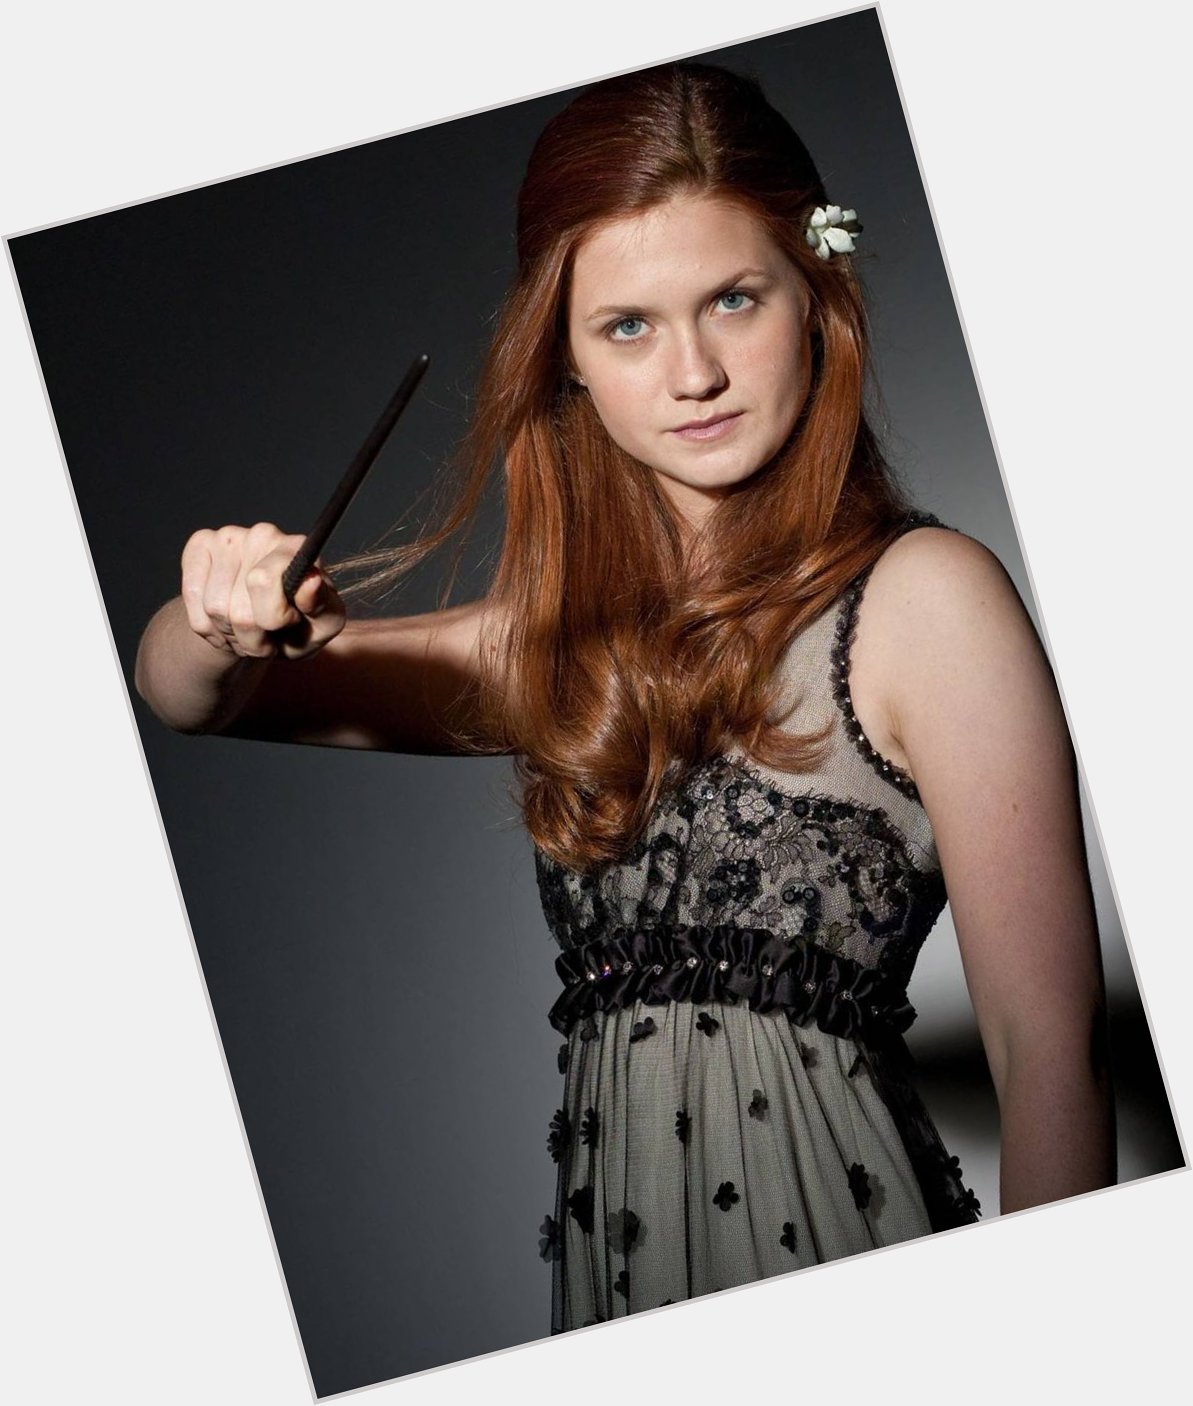 Happy Birthday to my favorite Harry Potter actor, Bonnie Wright! 